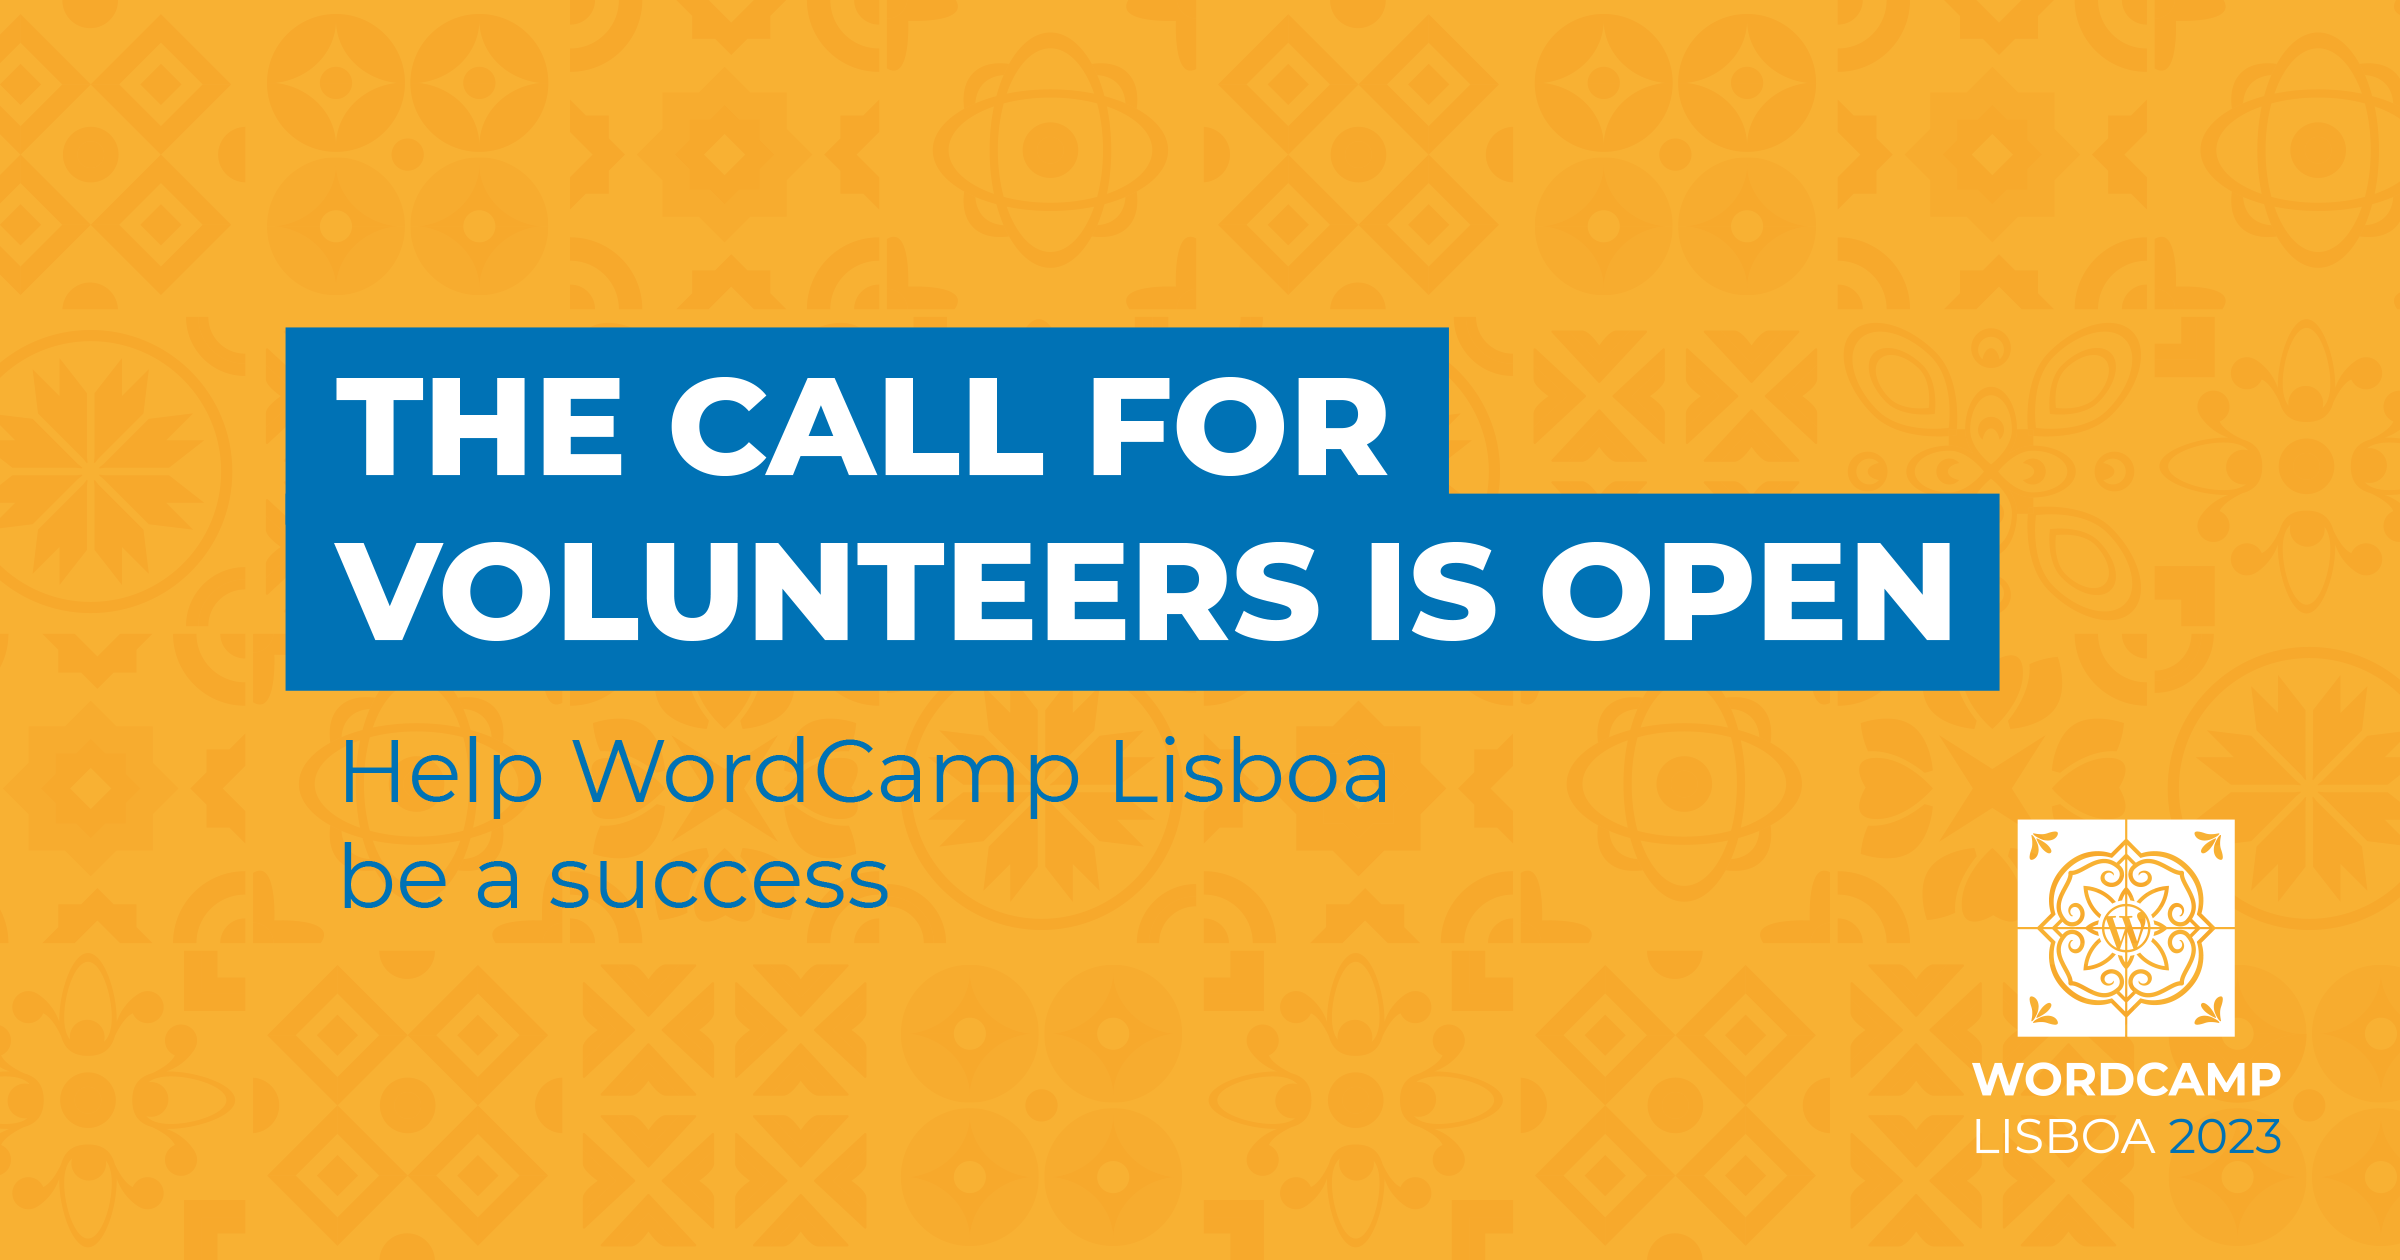 Do you want to volunteer on WordCamp Lisboa 2023? Apply here!